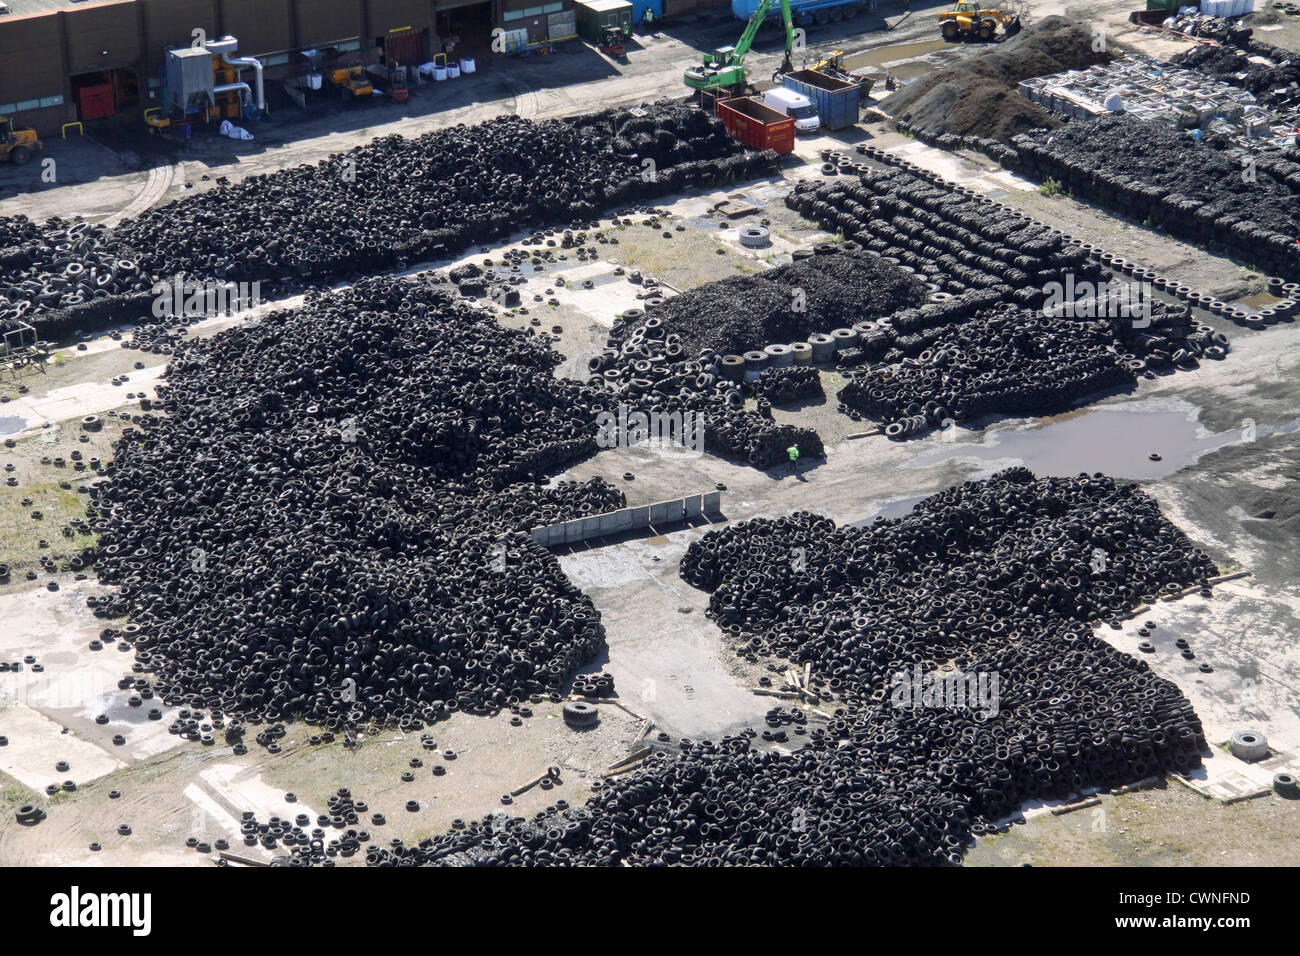 aerial view of a pile of car and other vehicle tyres tires Stock Photo